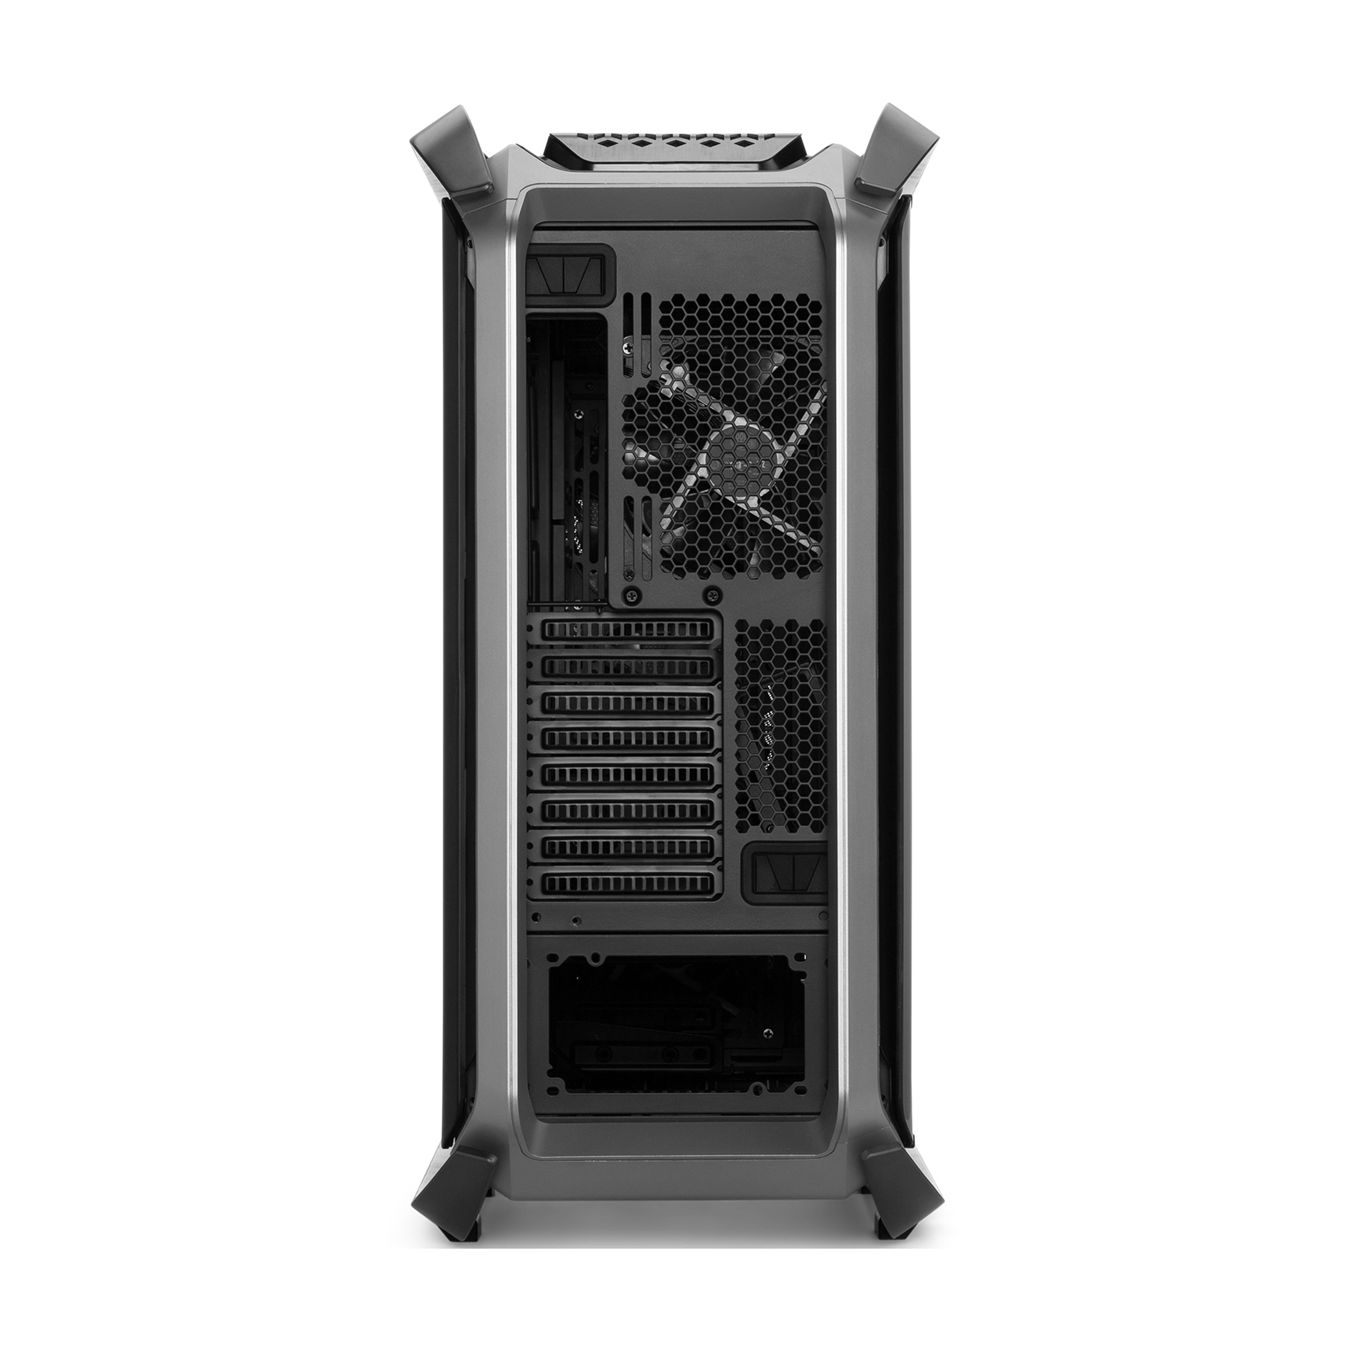 COSMOS C700M - included a 400mm PCIe 4.0 riser cable, facilitating vertical GPU mounting and superior data transmission speeds.